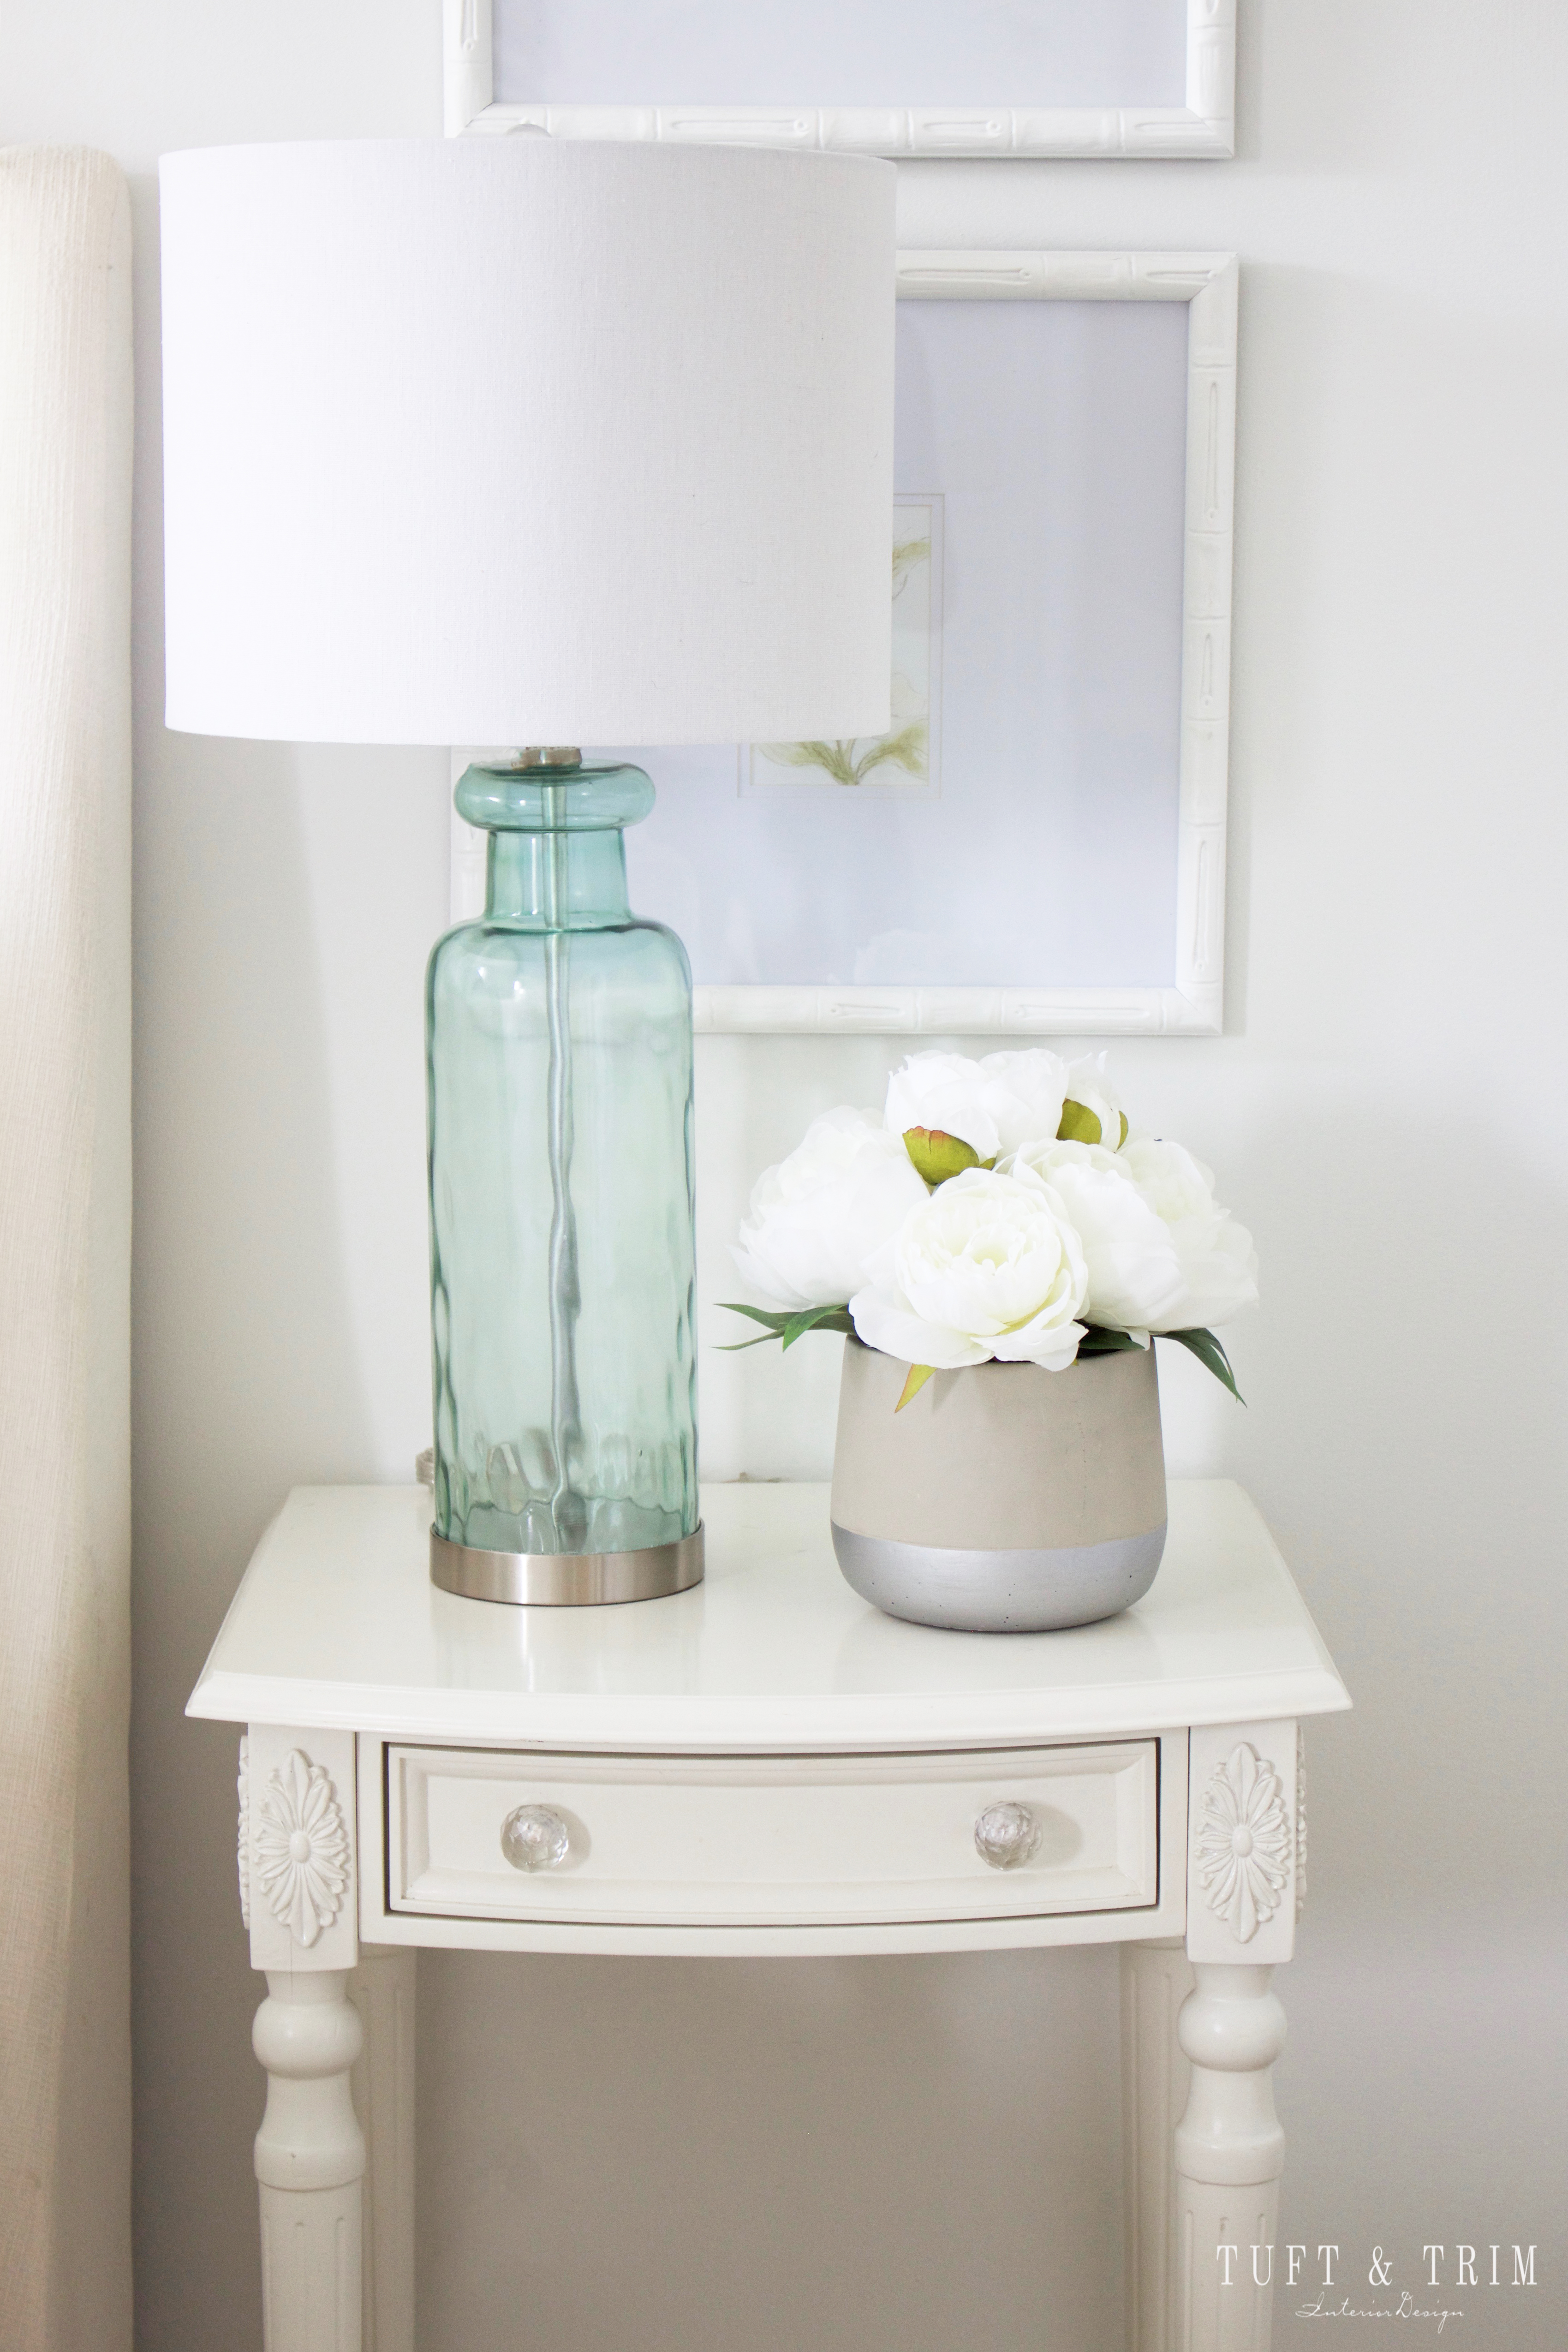 Easy Decorating Tips for Updating Your Bedroom on a Budget. Shop the look at tuftandtrim.com!